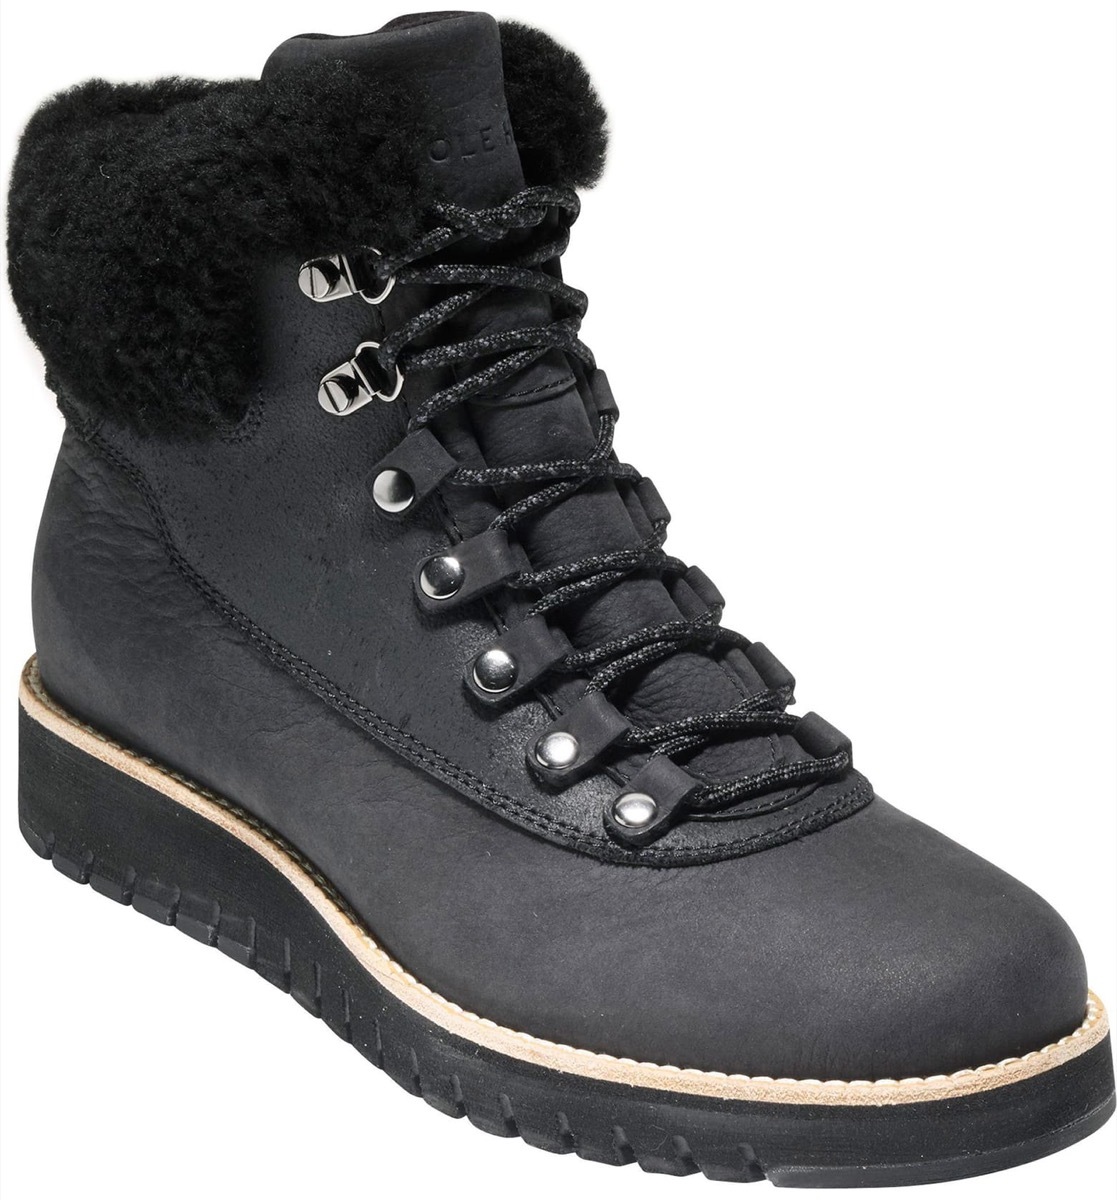 black hiking boots with shearling lining